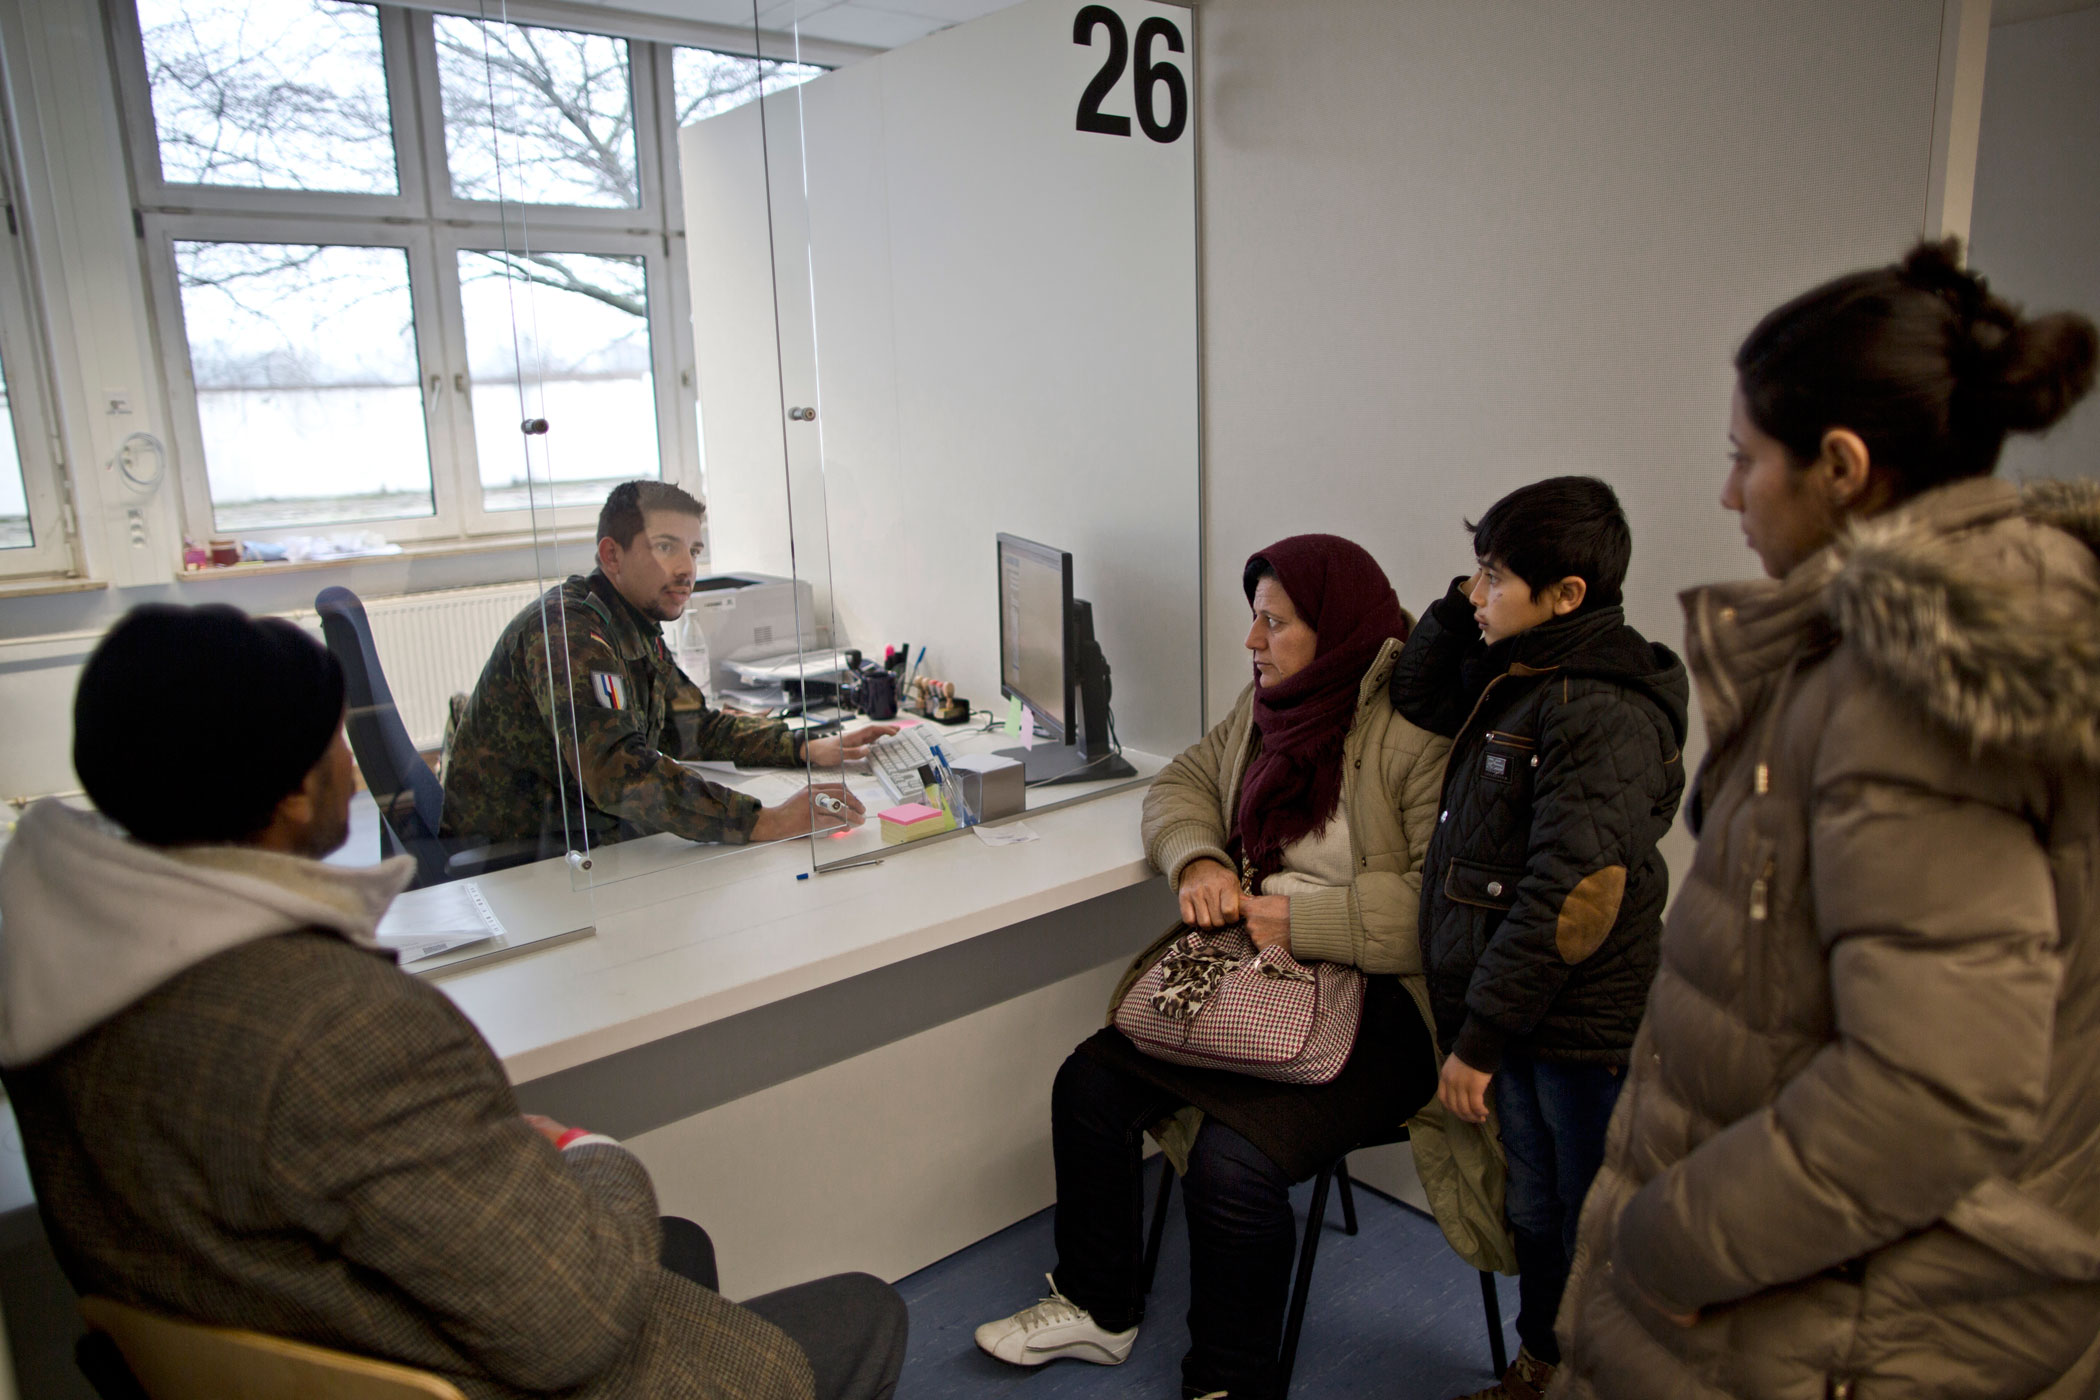 A German army soldier speaks with the Qasus as part of their asylum-seeking process at a registration center in Patrick Henry Village, Heidelberg, Germany, Dec. 9, 2015.